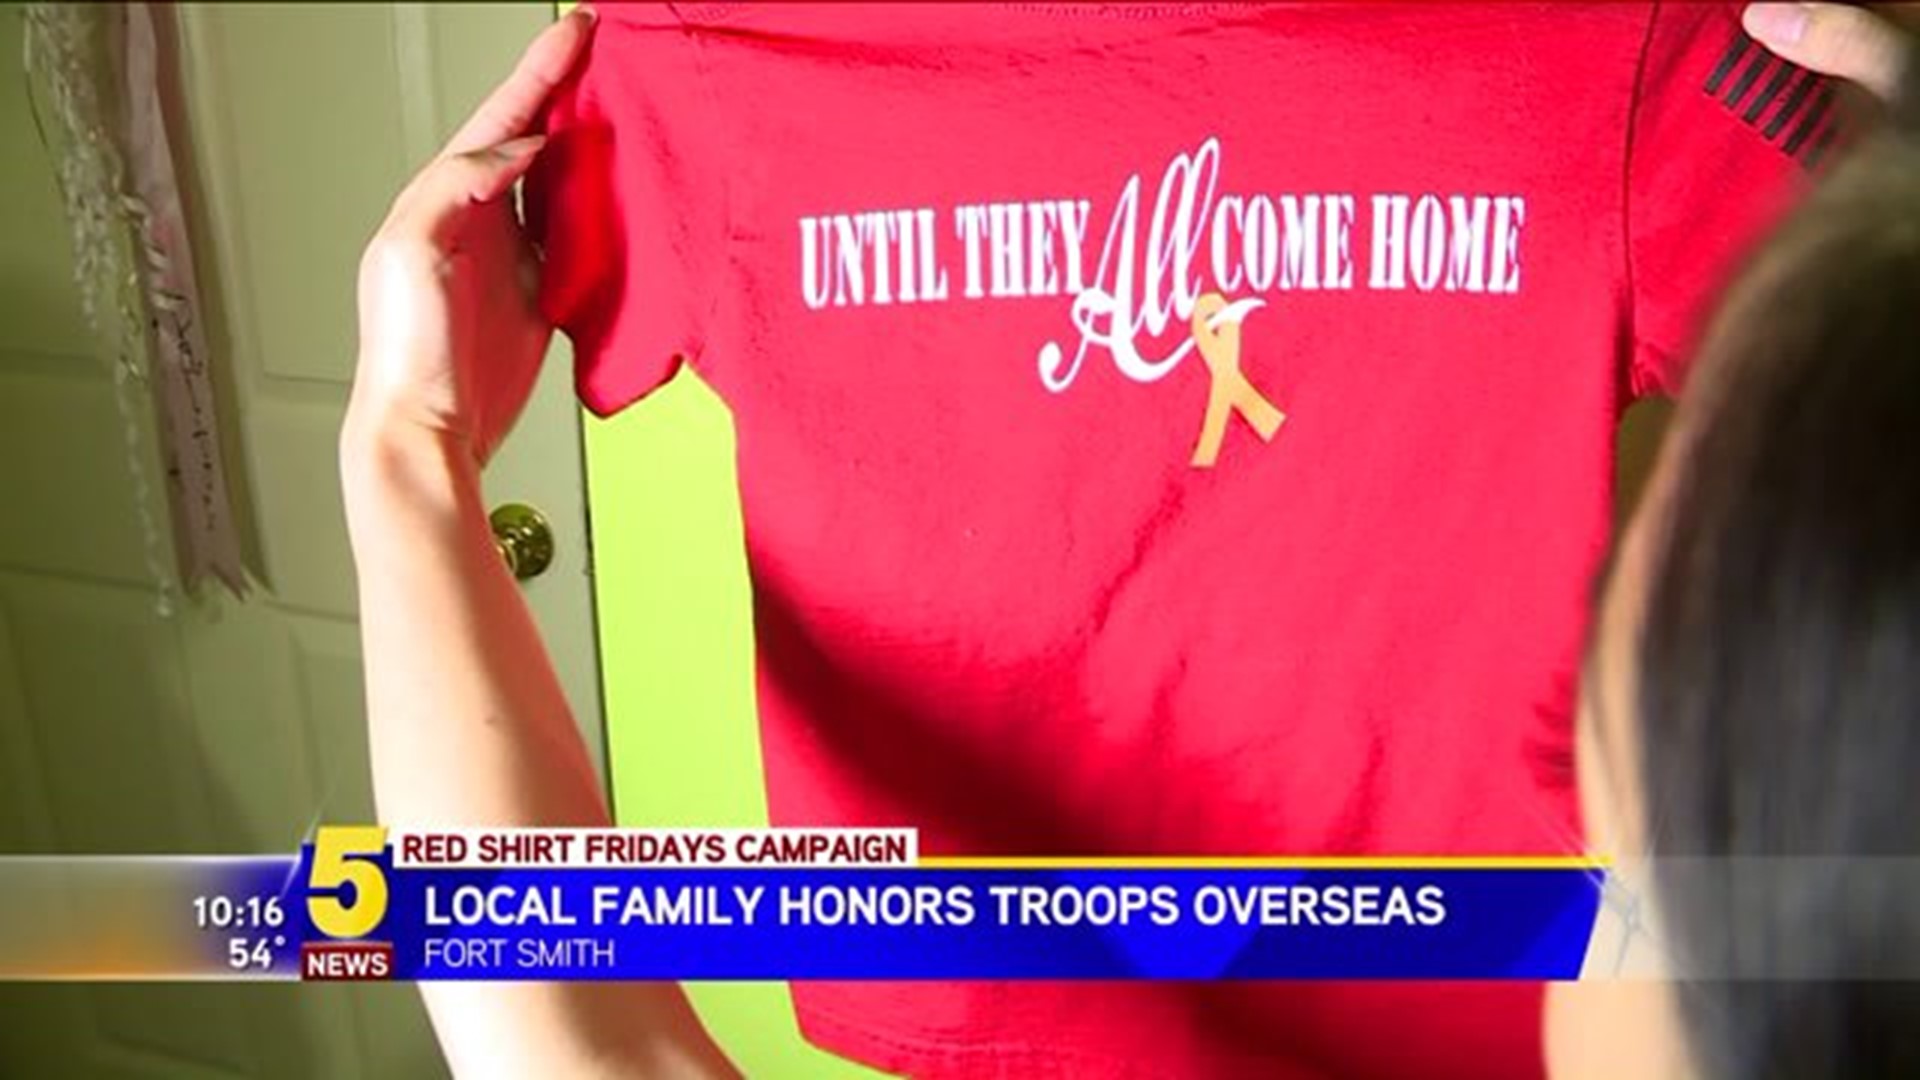 Local Family Honors Troops Overseas